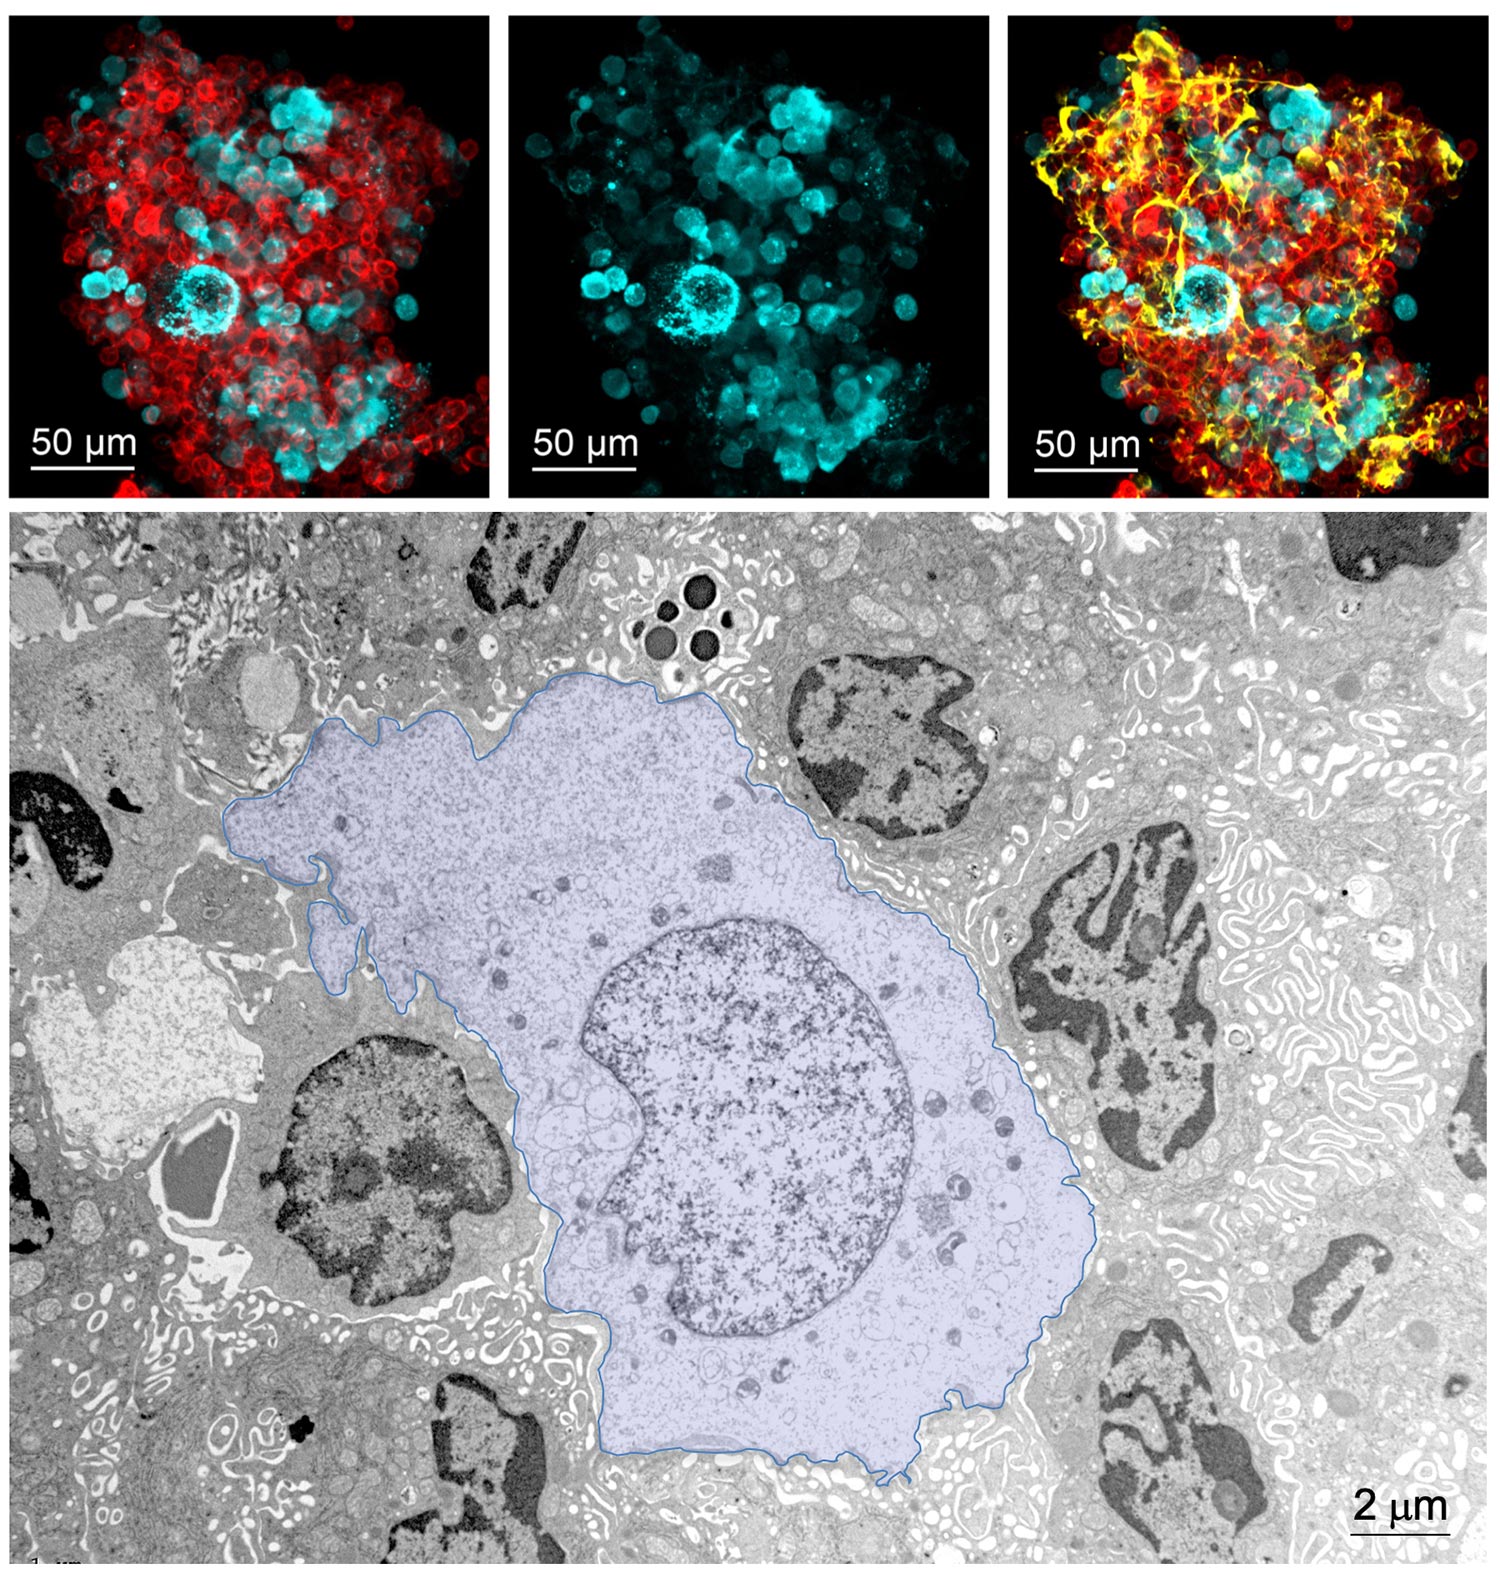 LPM-tumor cell aggregate free in the peritonal cavity, at 30 minutes after intraperitoneal injection of mouse tumor organoids. Blue: tumor cells; red:  F4/80, peritoneal macrophages; yellow: fibrinogen. Lower panel: electron microscopy image of an LPM-tumor cell aggregate free in the peritonal cavity, at 20 minutes after intraperitoneal injection of mouse tumor organoids, showing a necrotic tumor cell (coloured in violet), surrounded by peritoneal macrophages.